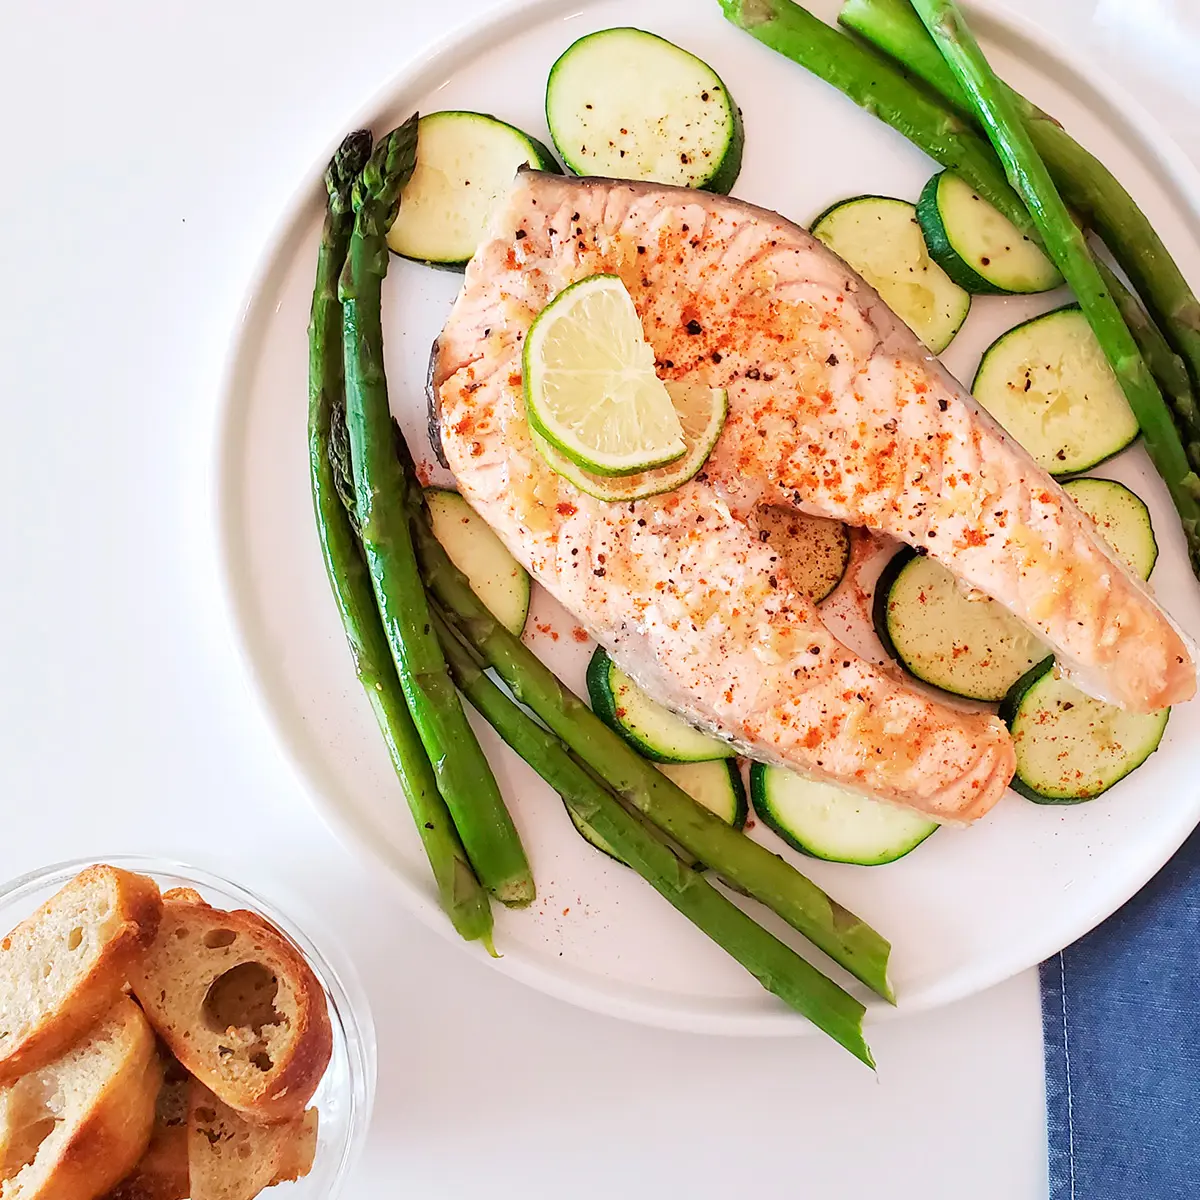 Oven-baked salmon steaks, asparagus and zucchinis